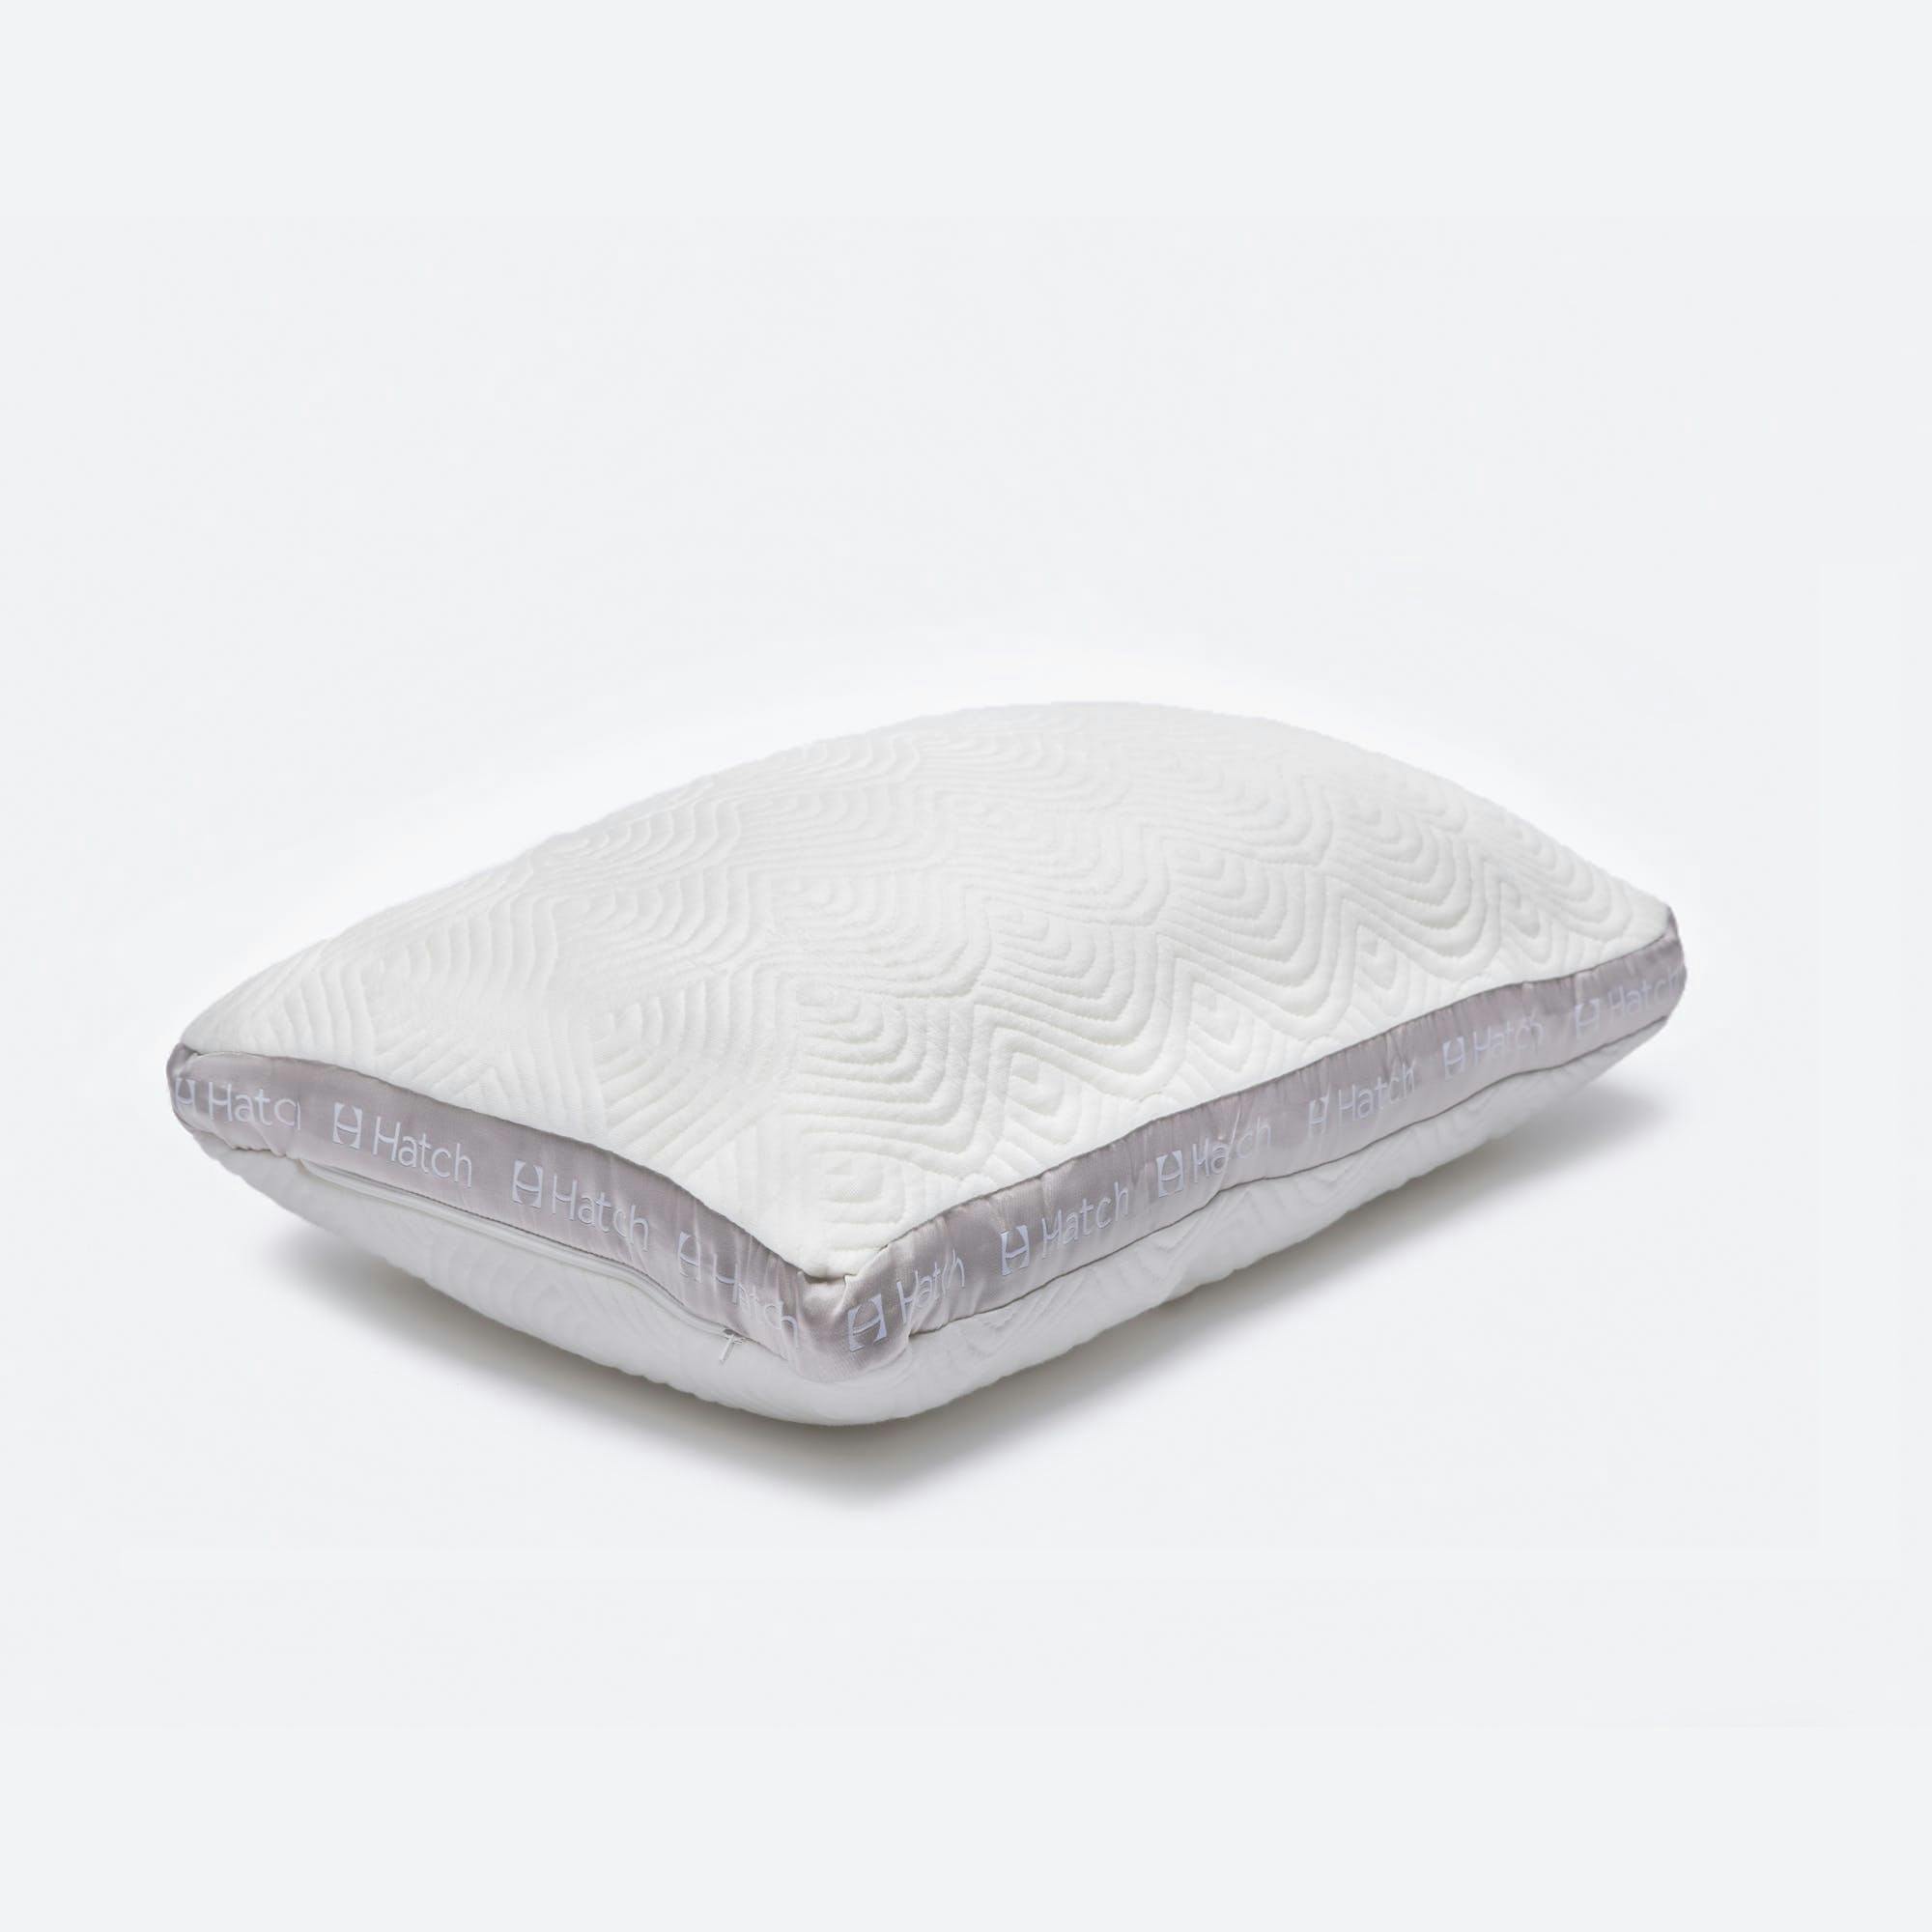 Side angle of the Hatch Cloud pillow